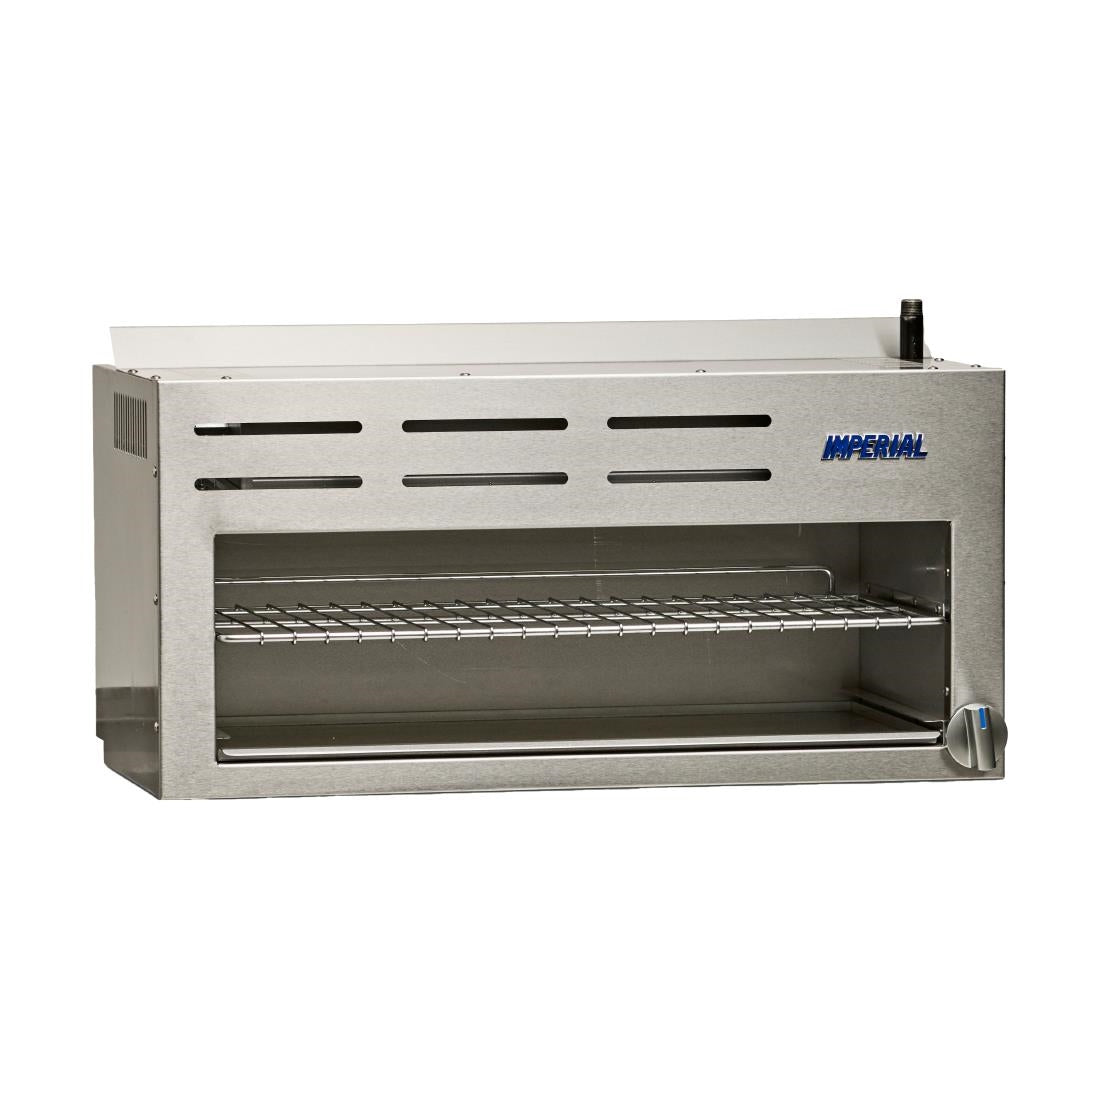 CX923 Imperial Infrared Cheesemelter Grill LPG ICMA-36 JD Catering Equipment Solutions Ltd